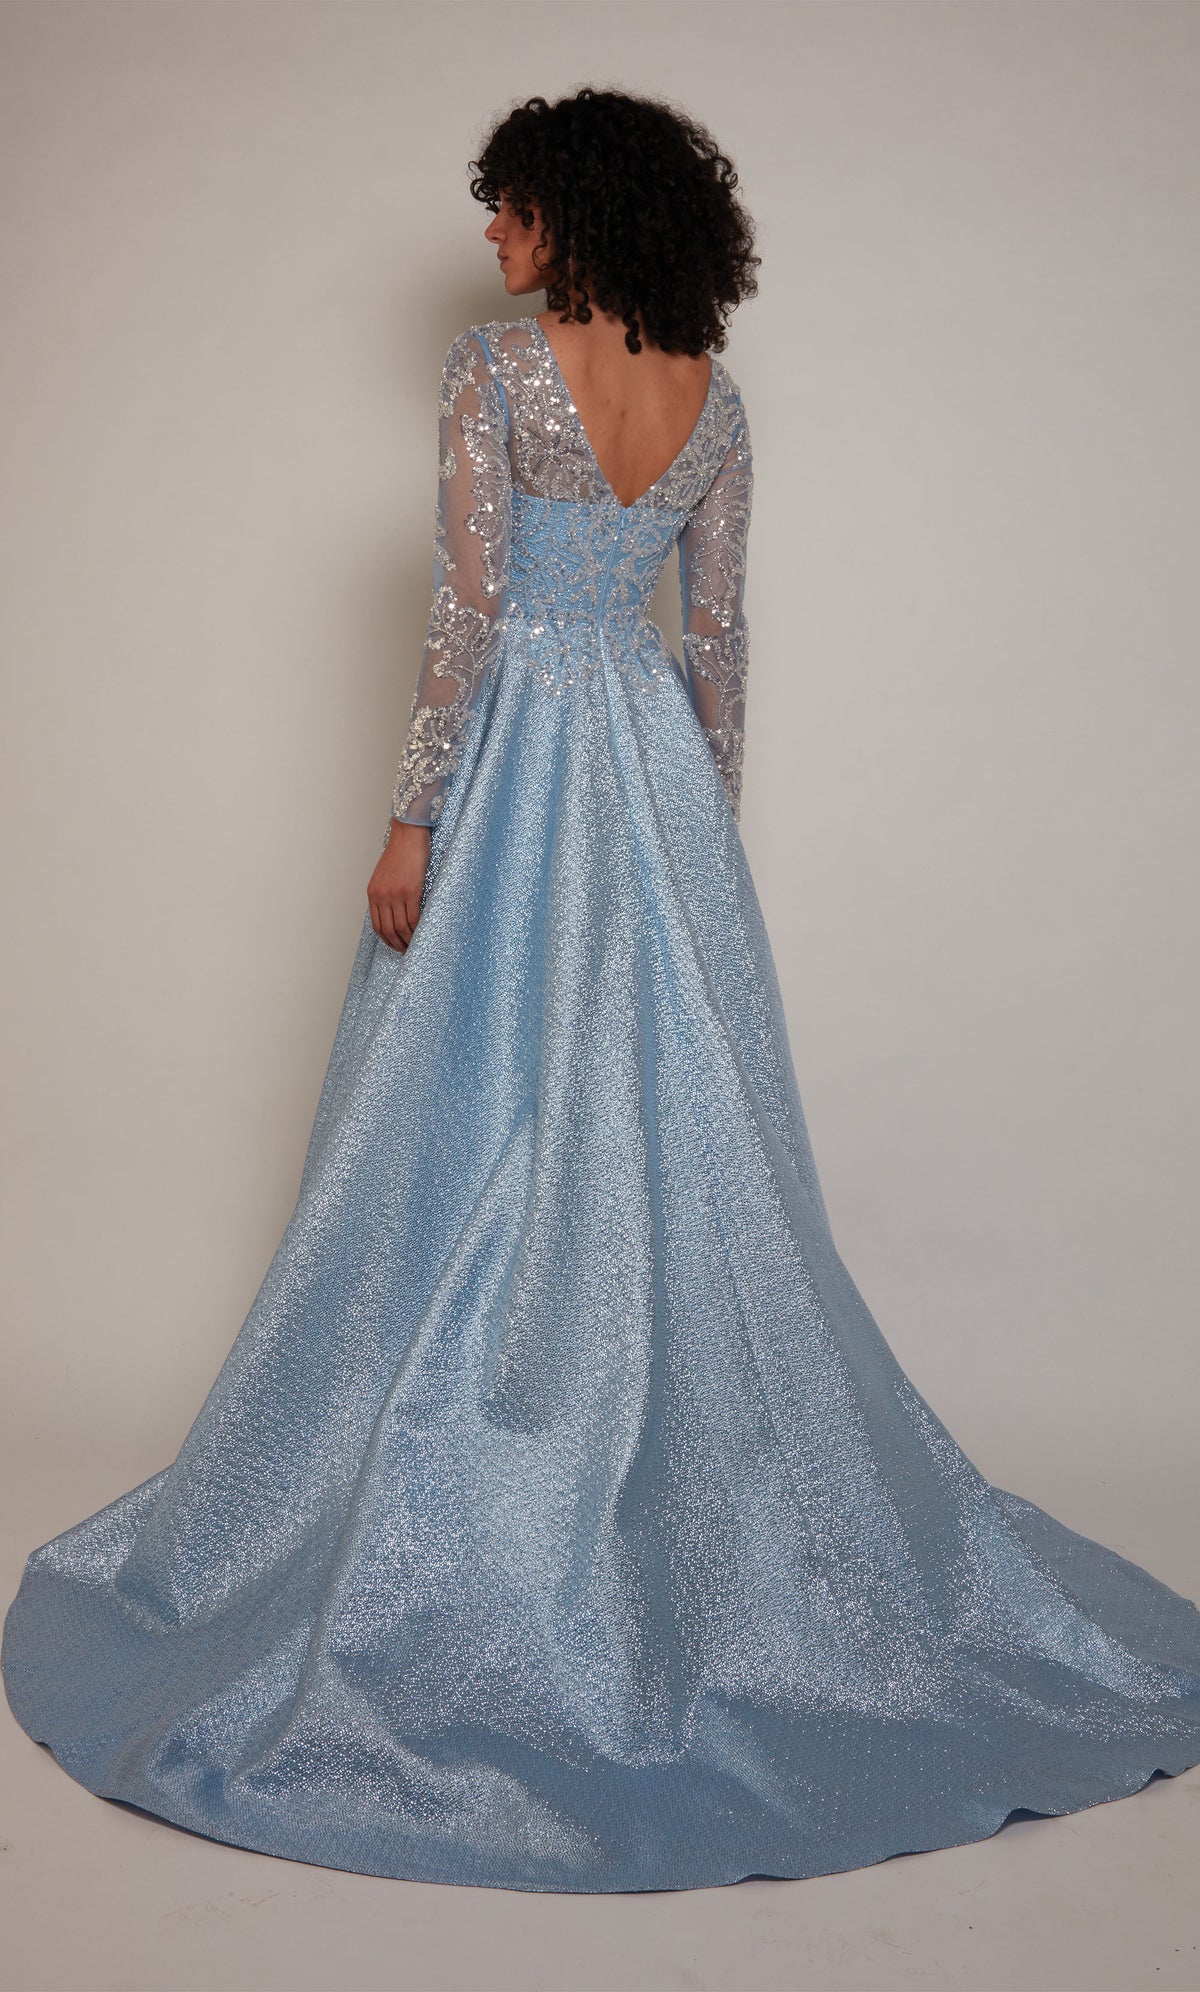 A french blue A-line mother of the bride gown with long sleeves and a long dramatic train. The bodice of the dress has a beautiful embellished tulle overlay.